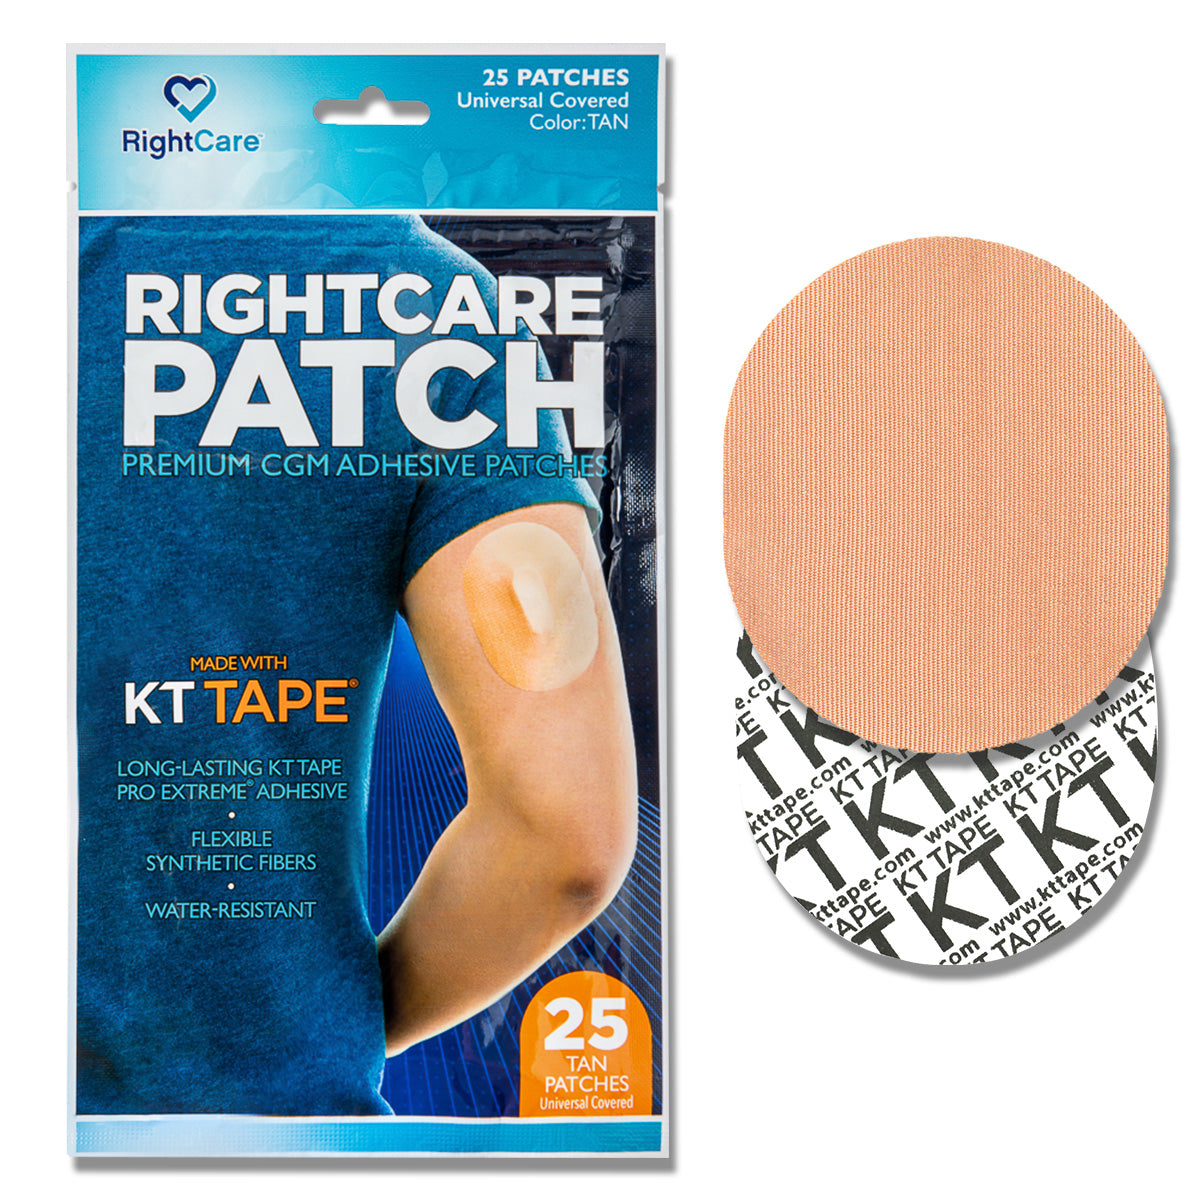 RightCare CGM Adhesive Patch made with KT Tape, Universal, Bag of 25 83169739